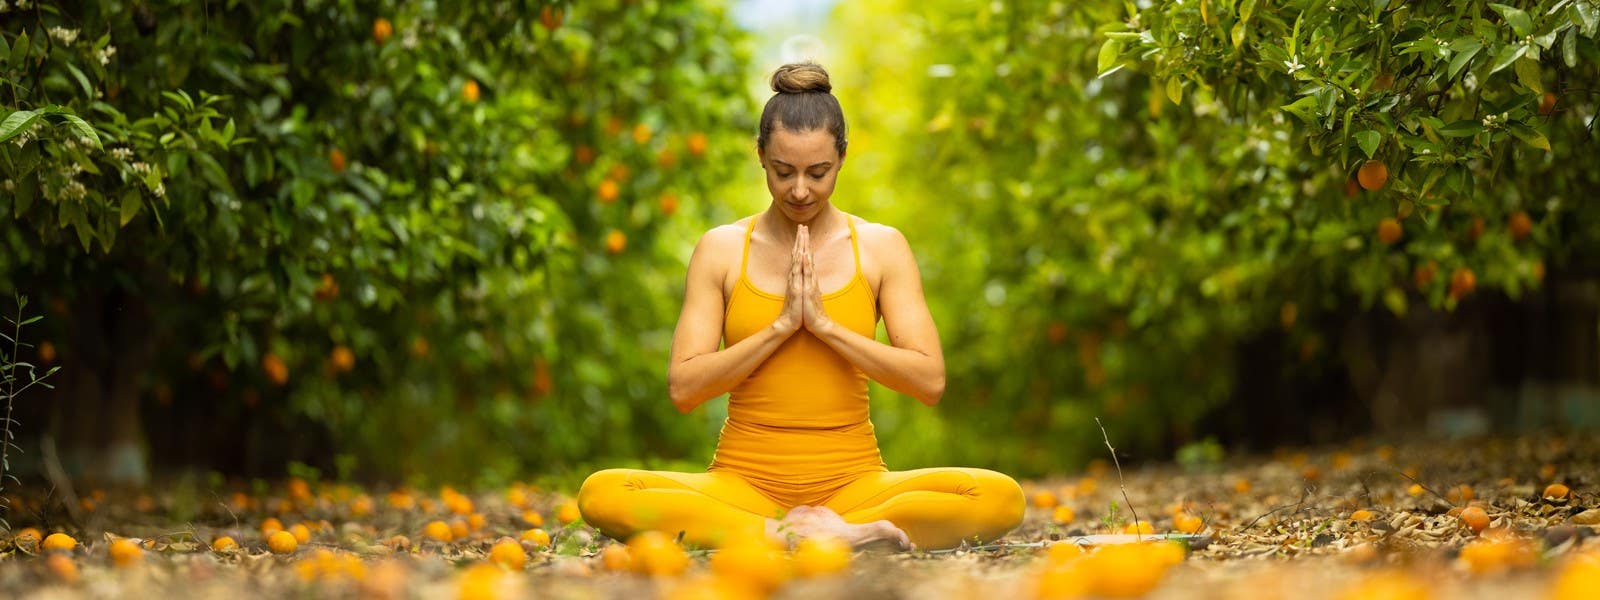 Body-Positive Yoga: How to Deepen Your Practice with Mindfulness